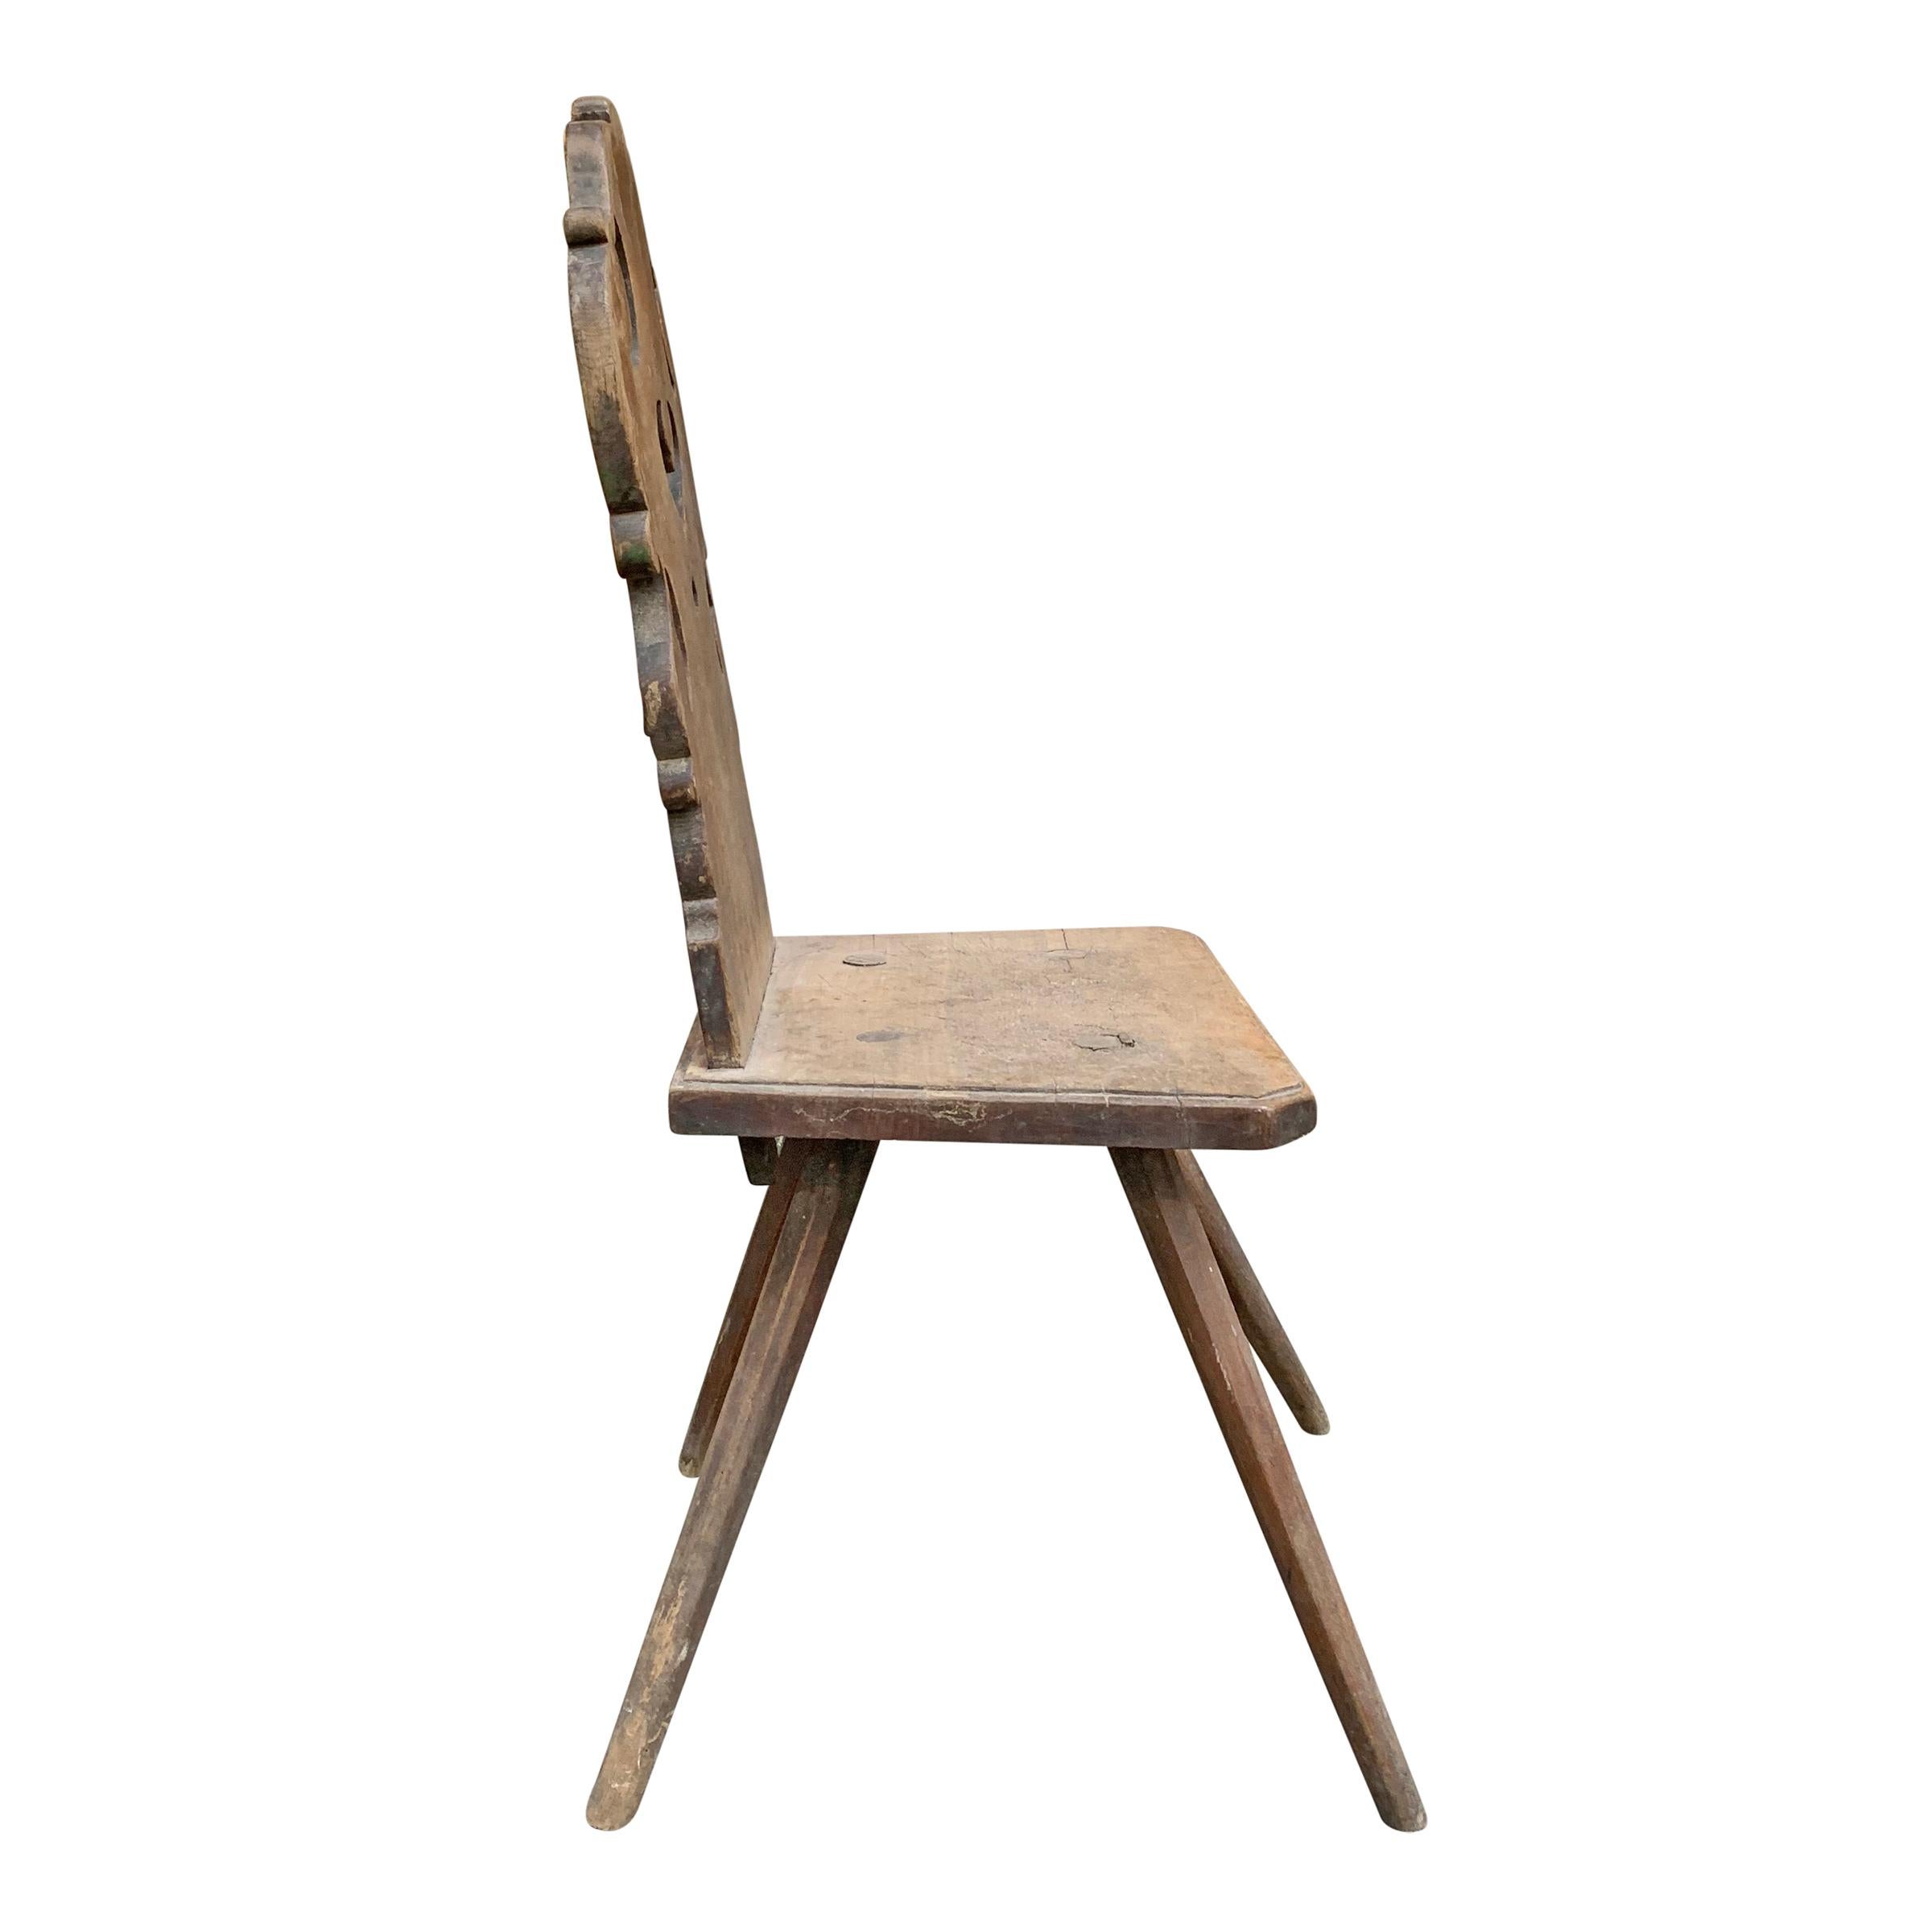 Rustic 19th Century Tyrolean Side Chair